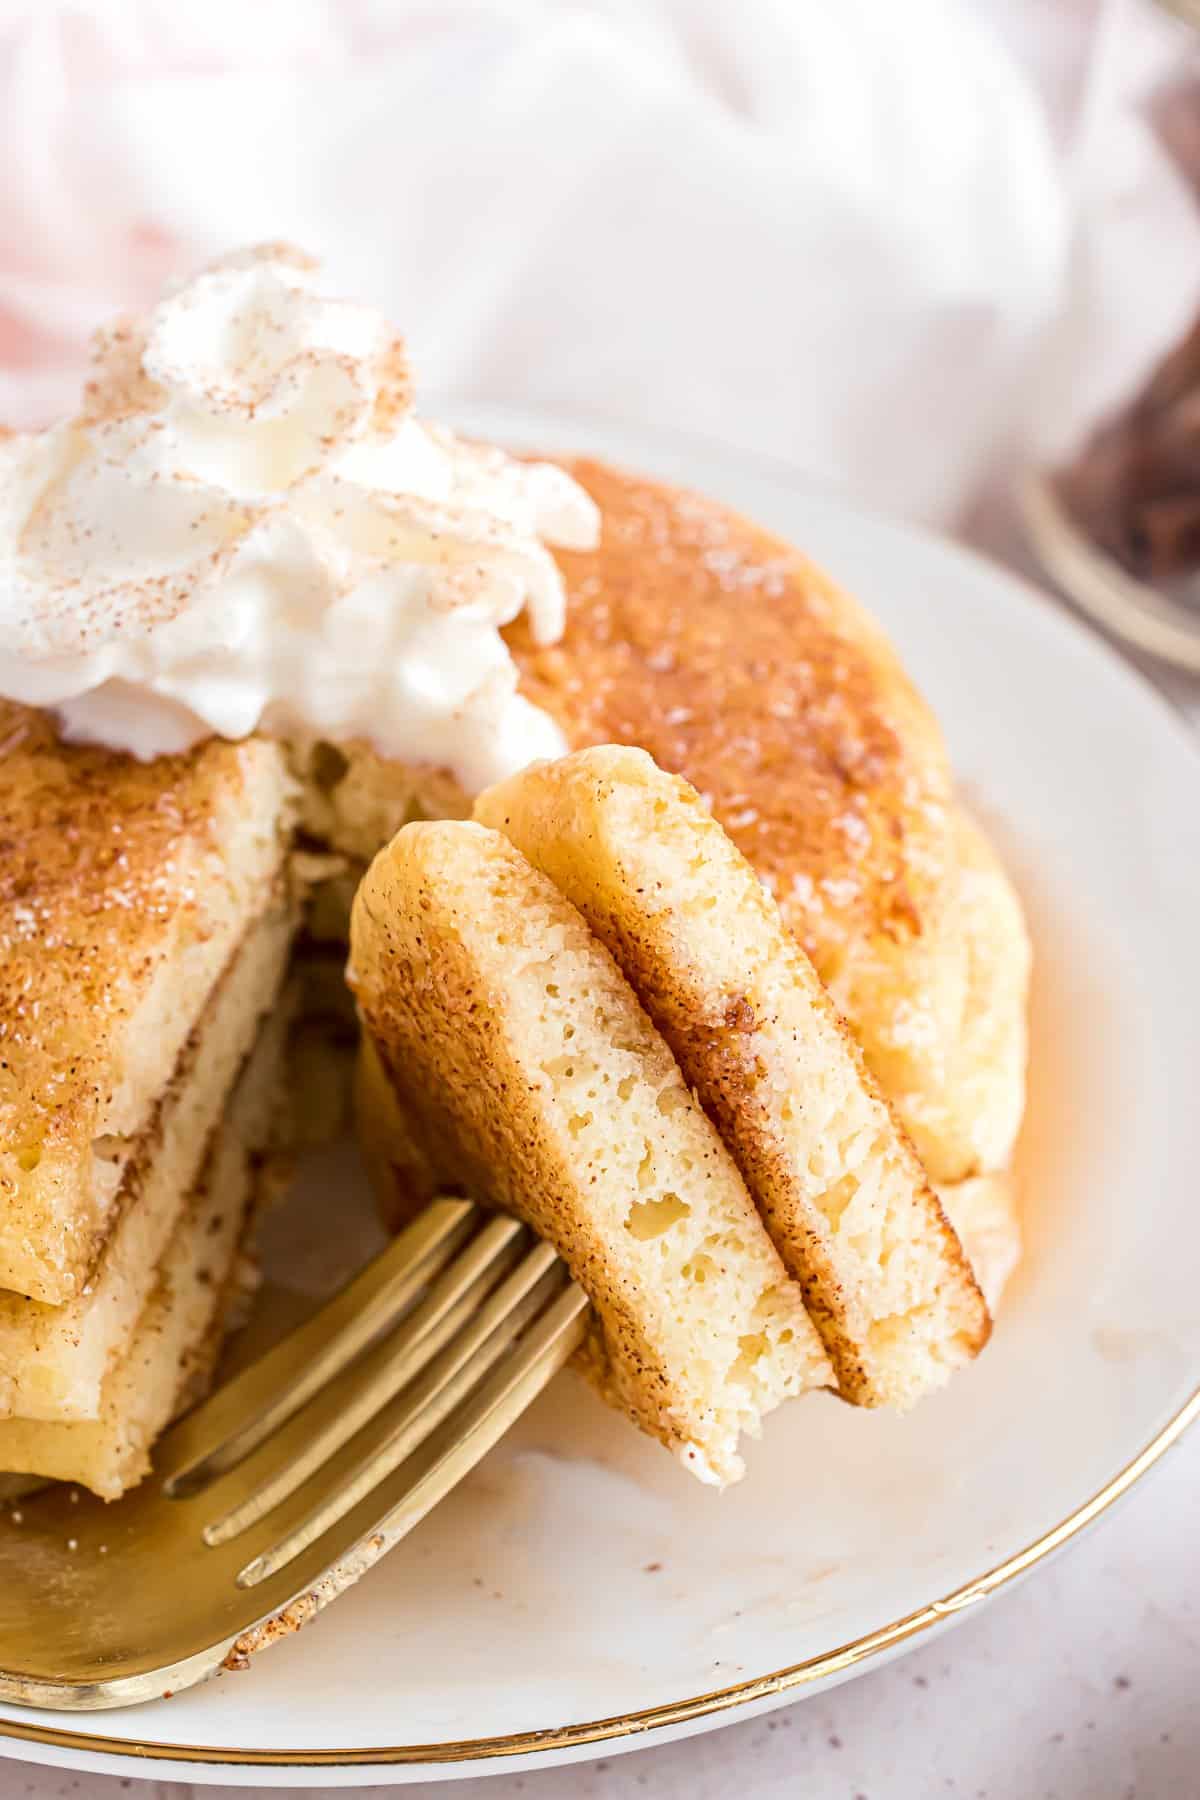 Cinnamon dusted pancakes, cut to show texture.